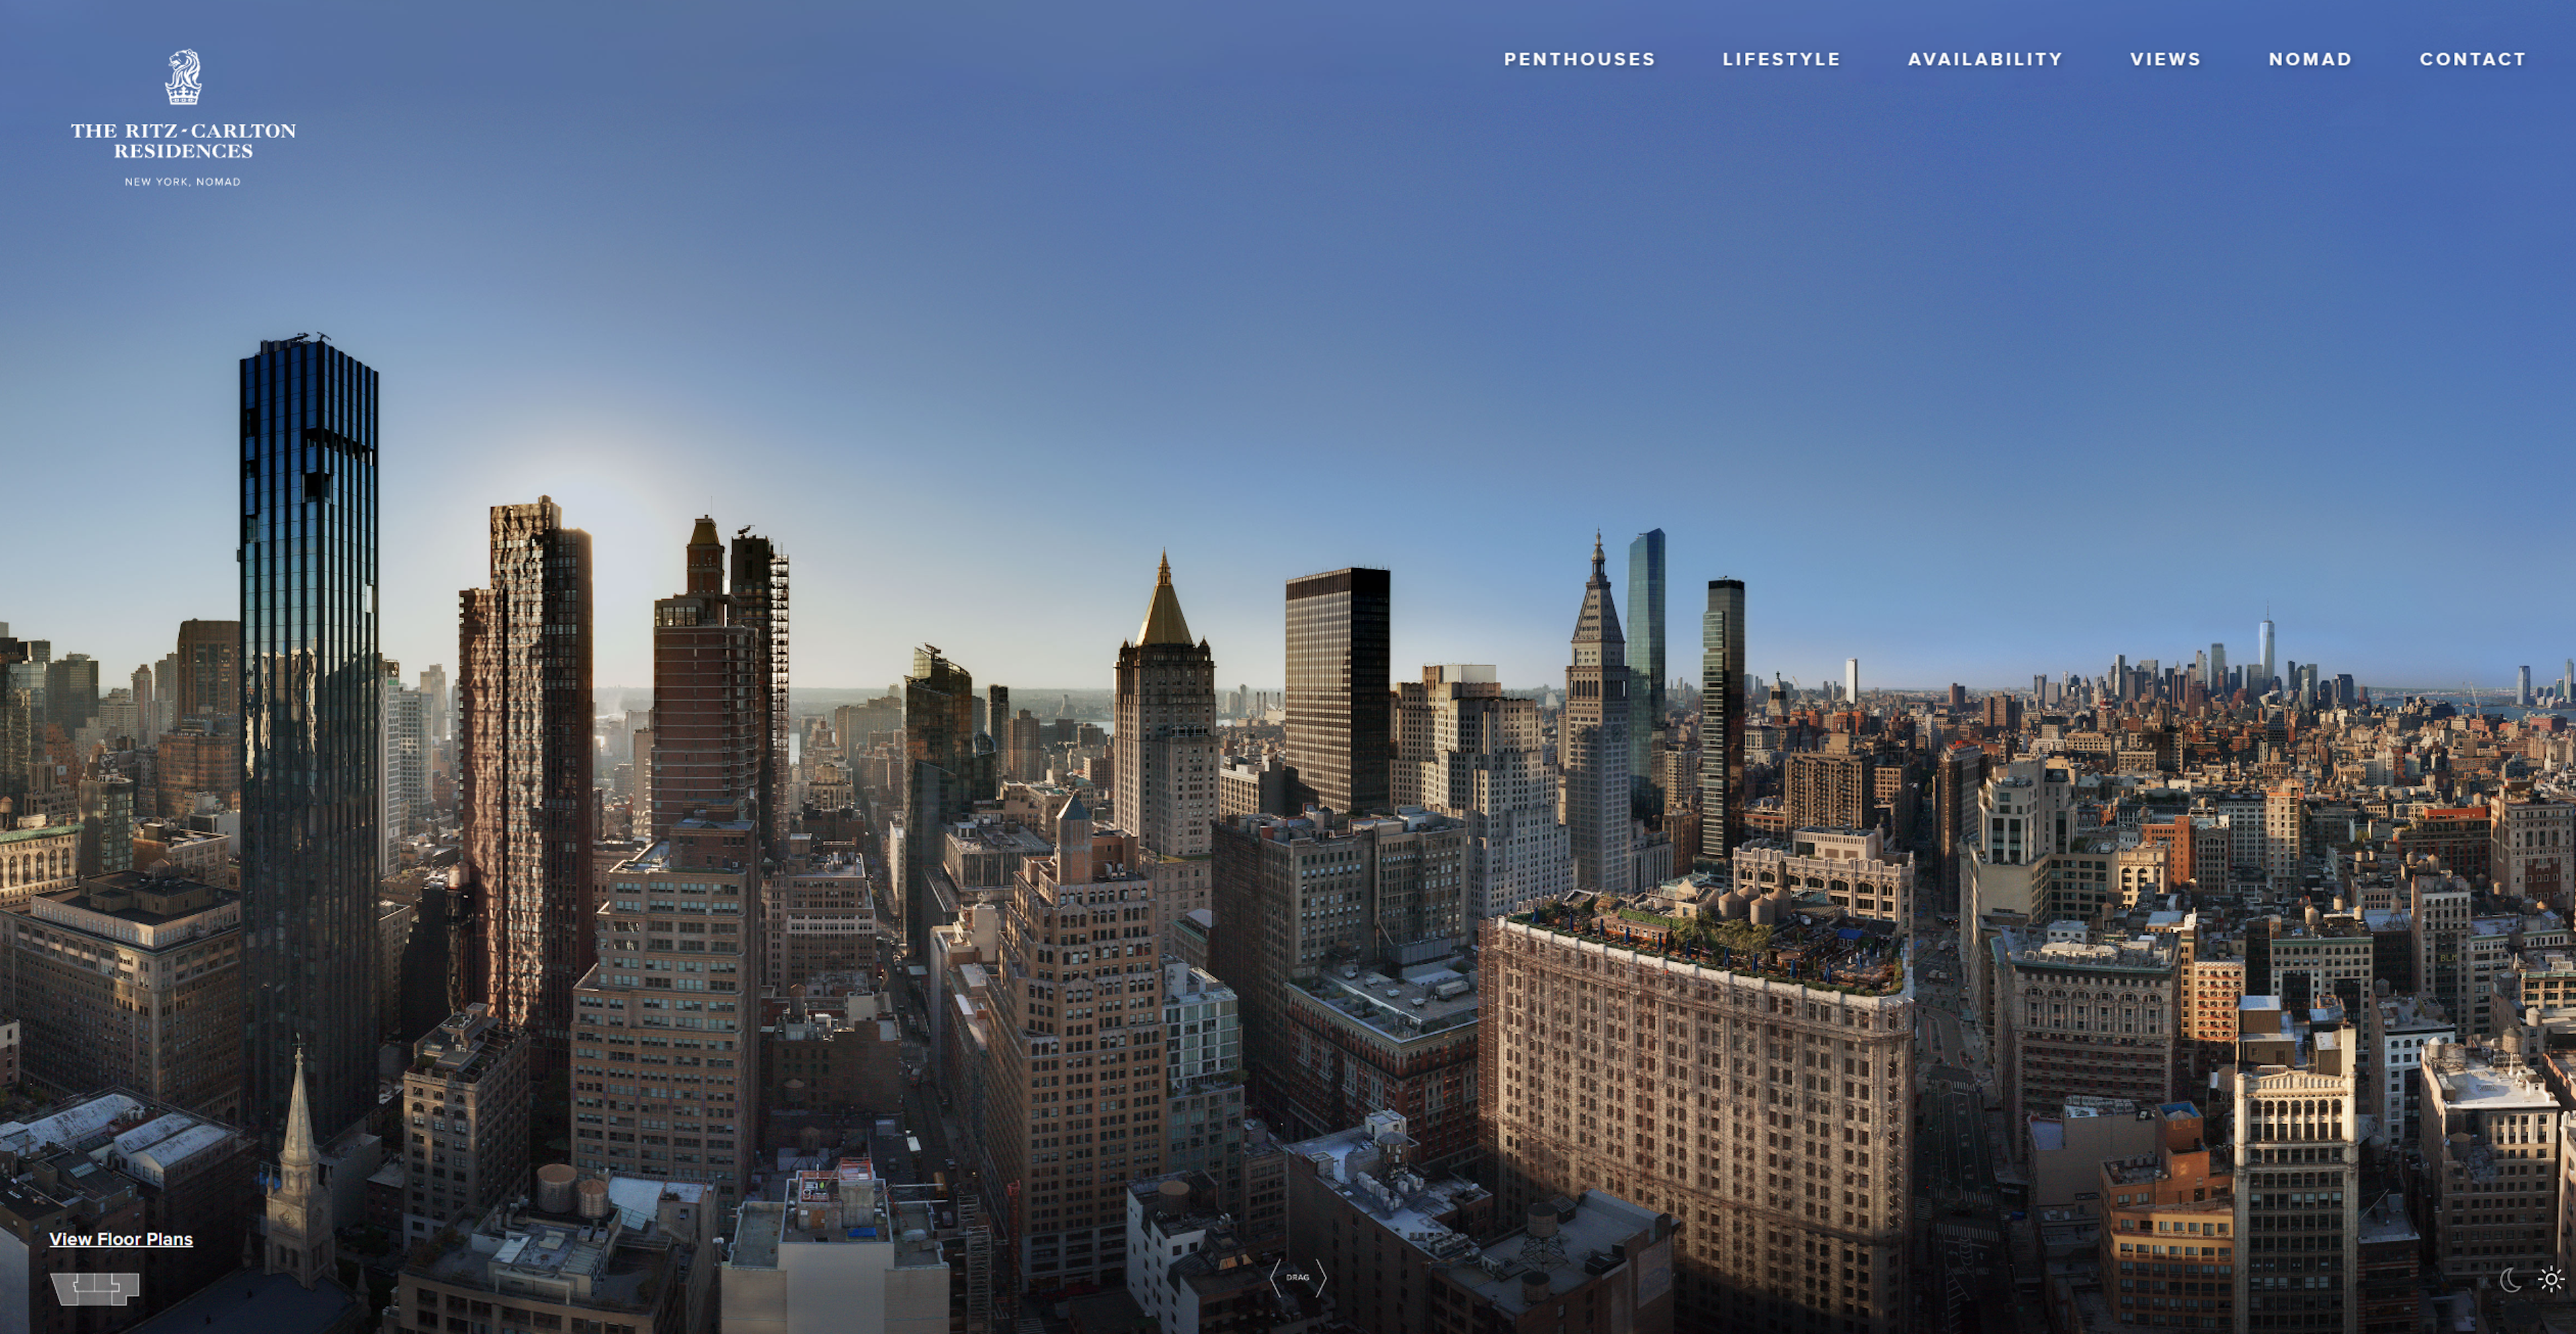 A screenshot of the panoramic View tool from the site.